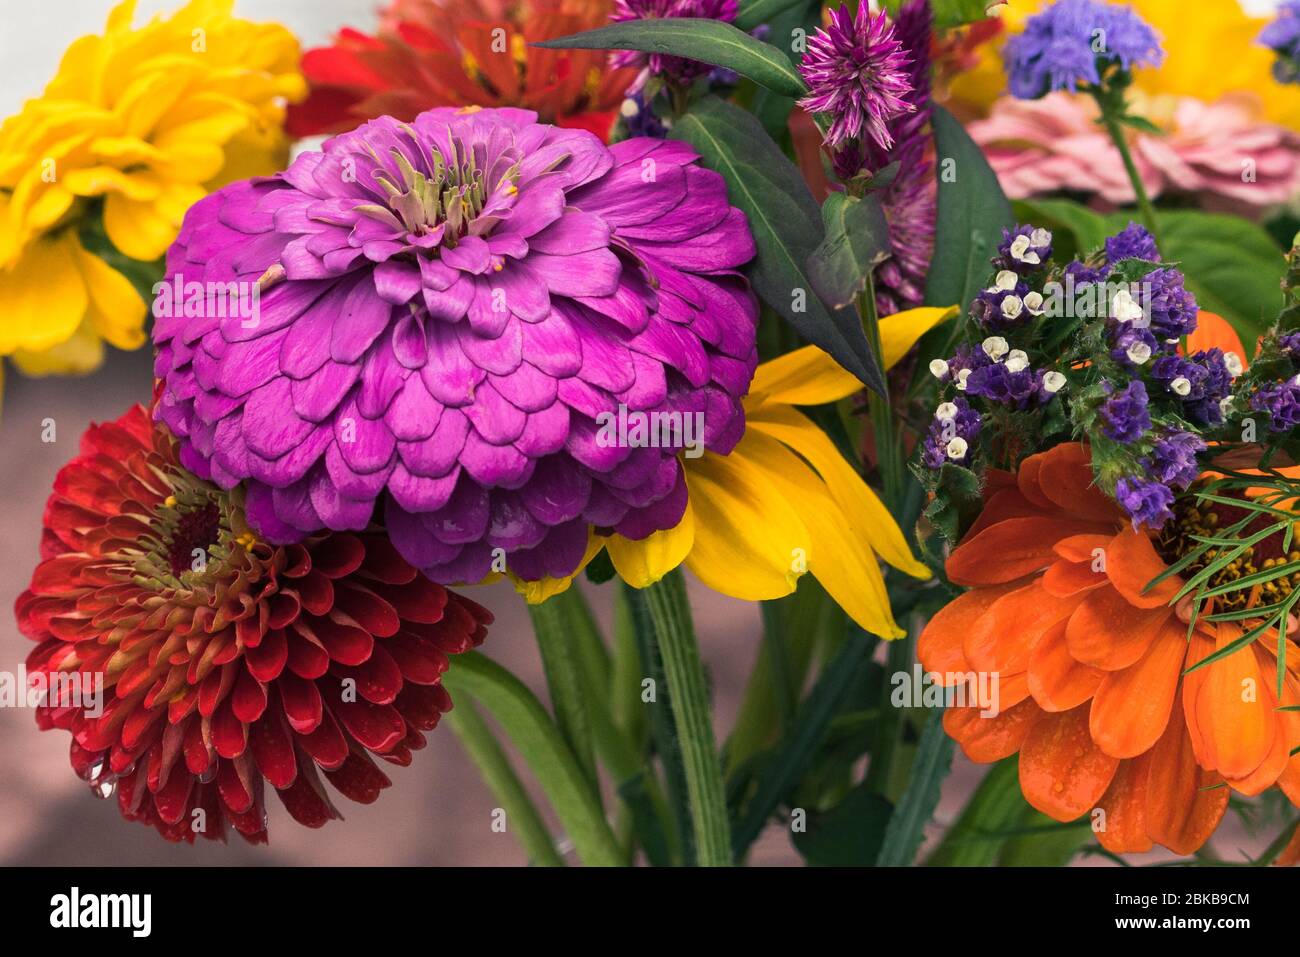 Spring and Its Flowers Stock Photo